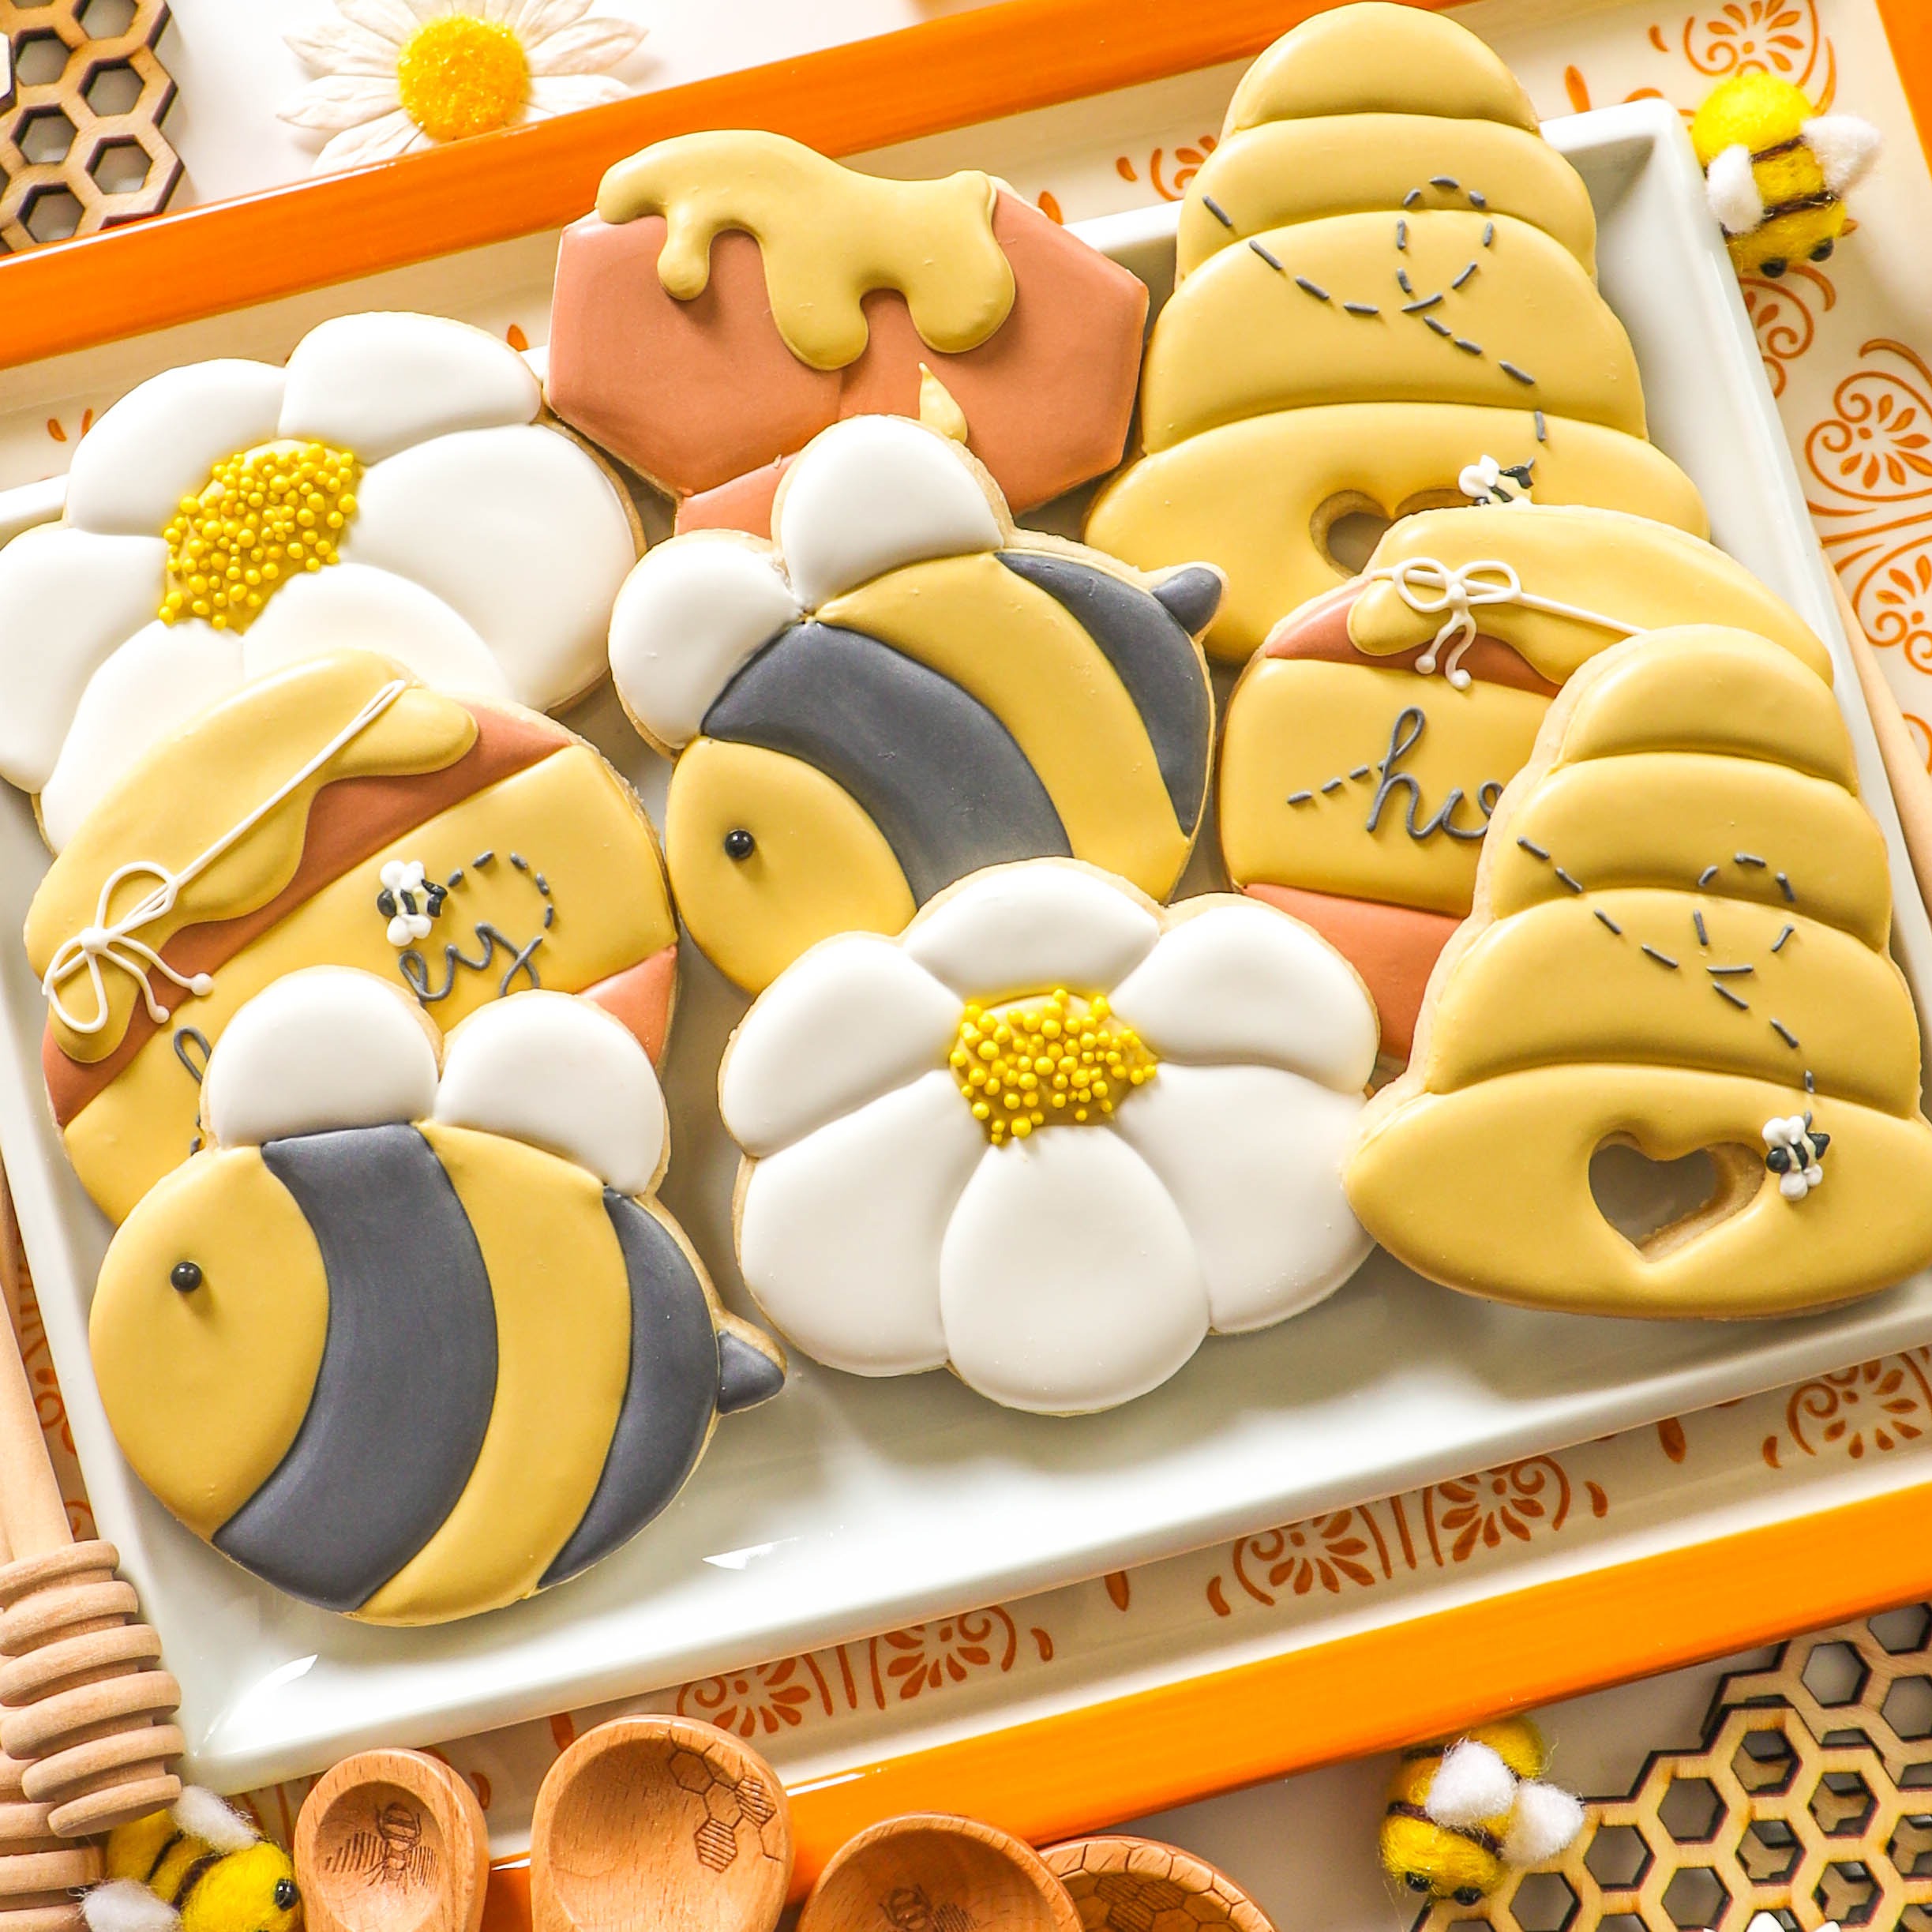 CLASS COOKIE DECORATING: April 13 - 11AM Oh Honey! - Cookie Decorating Class